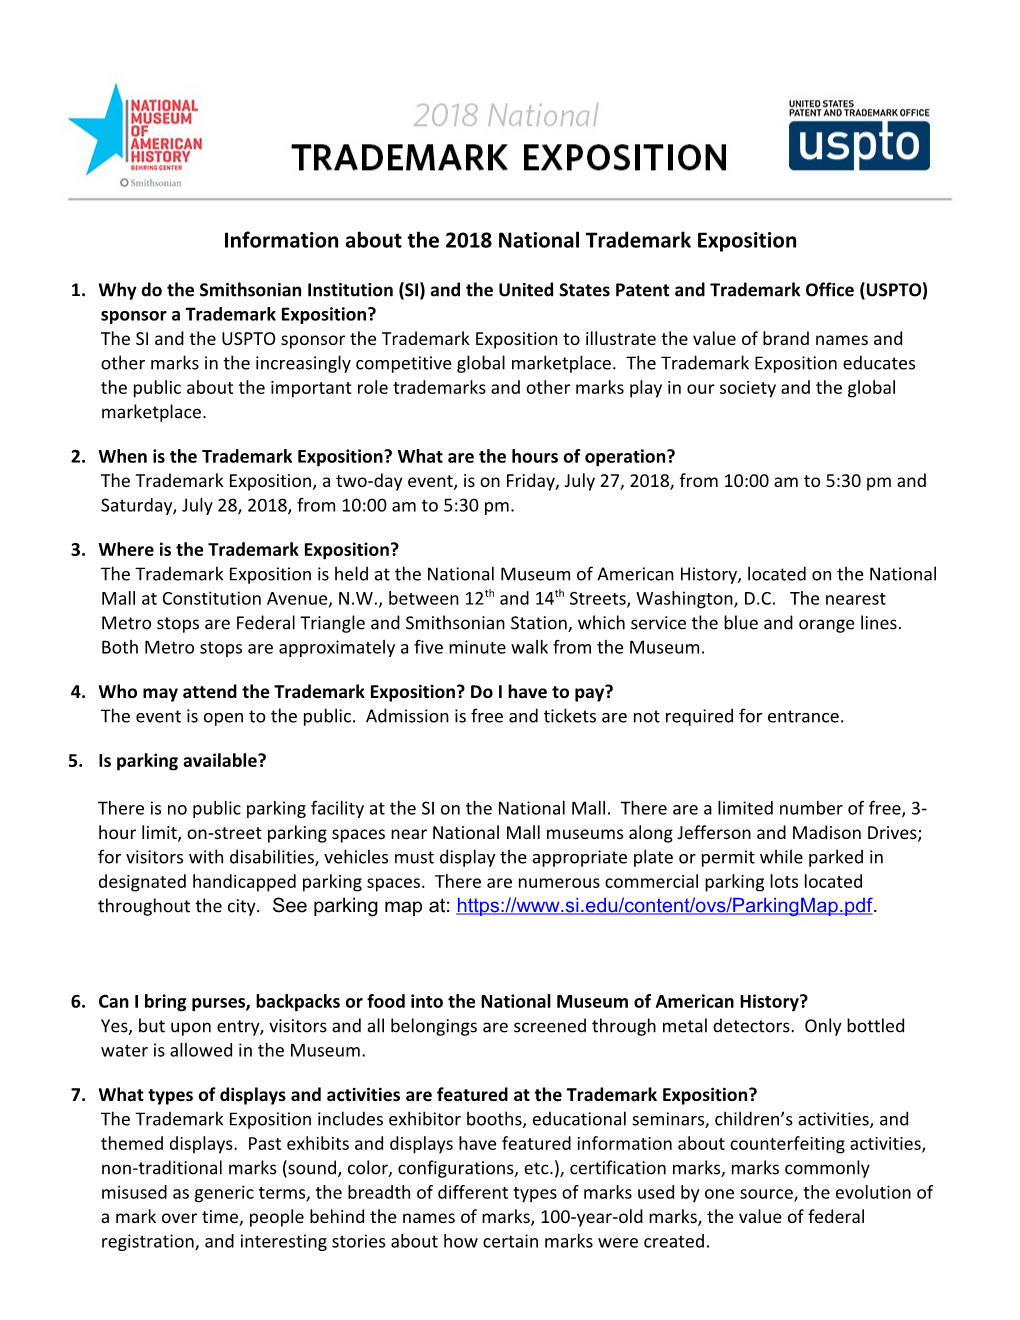 Information About the 2018 National Trademark Exposition